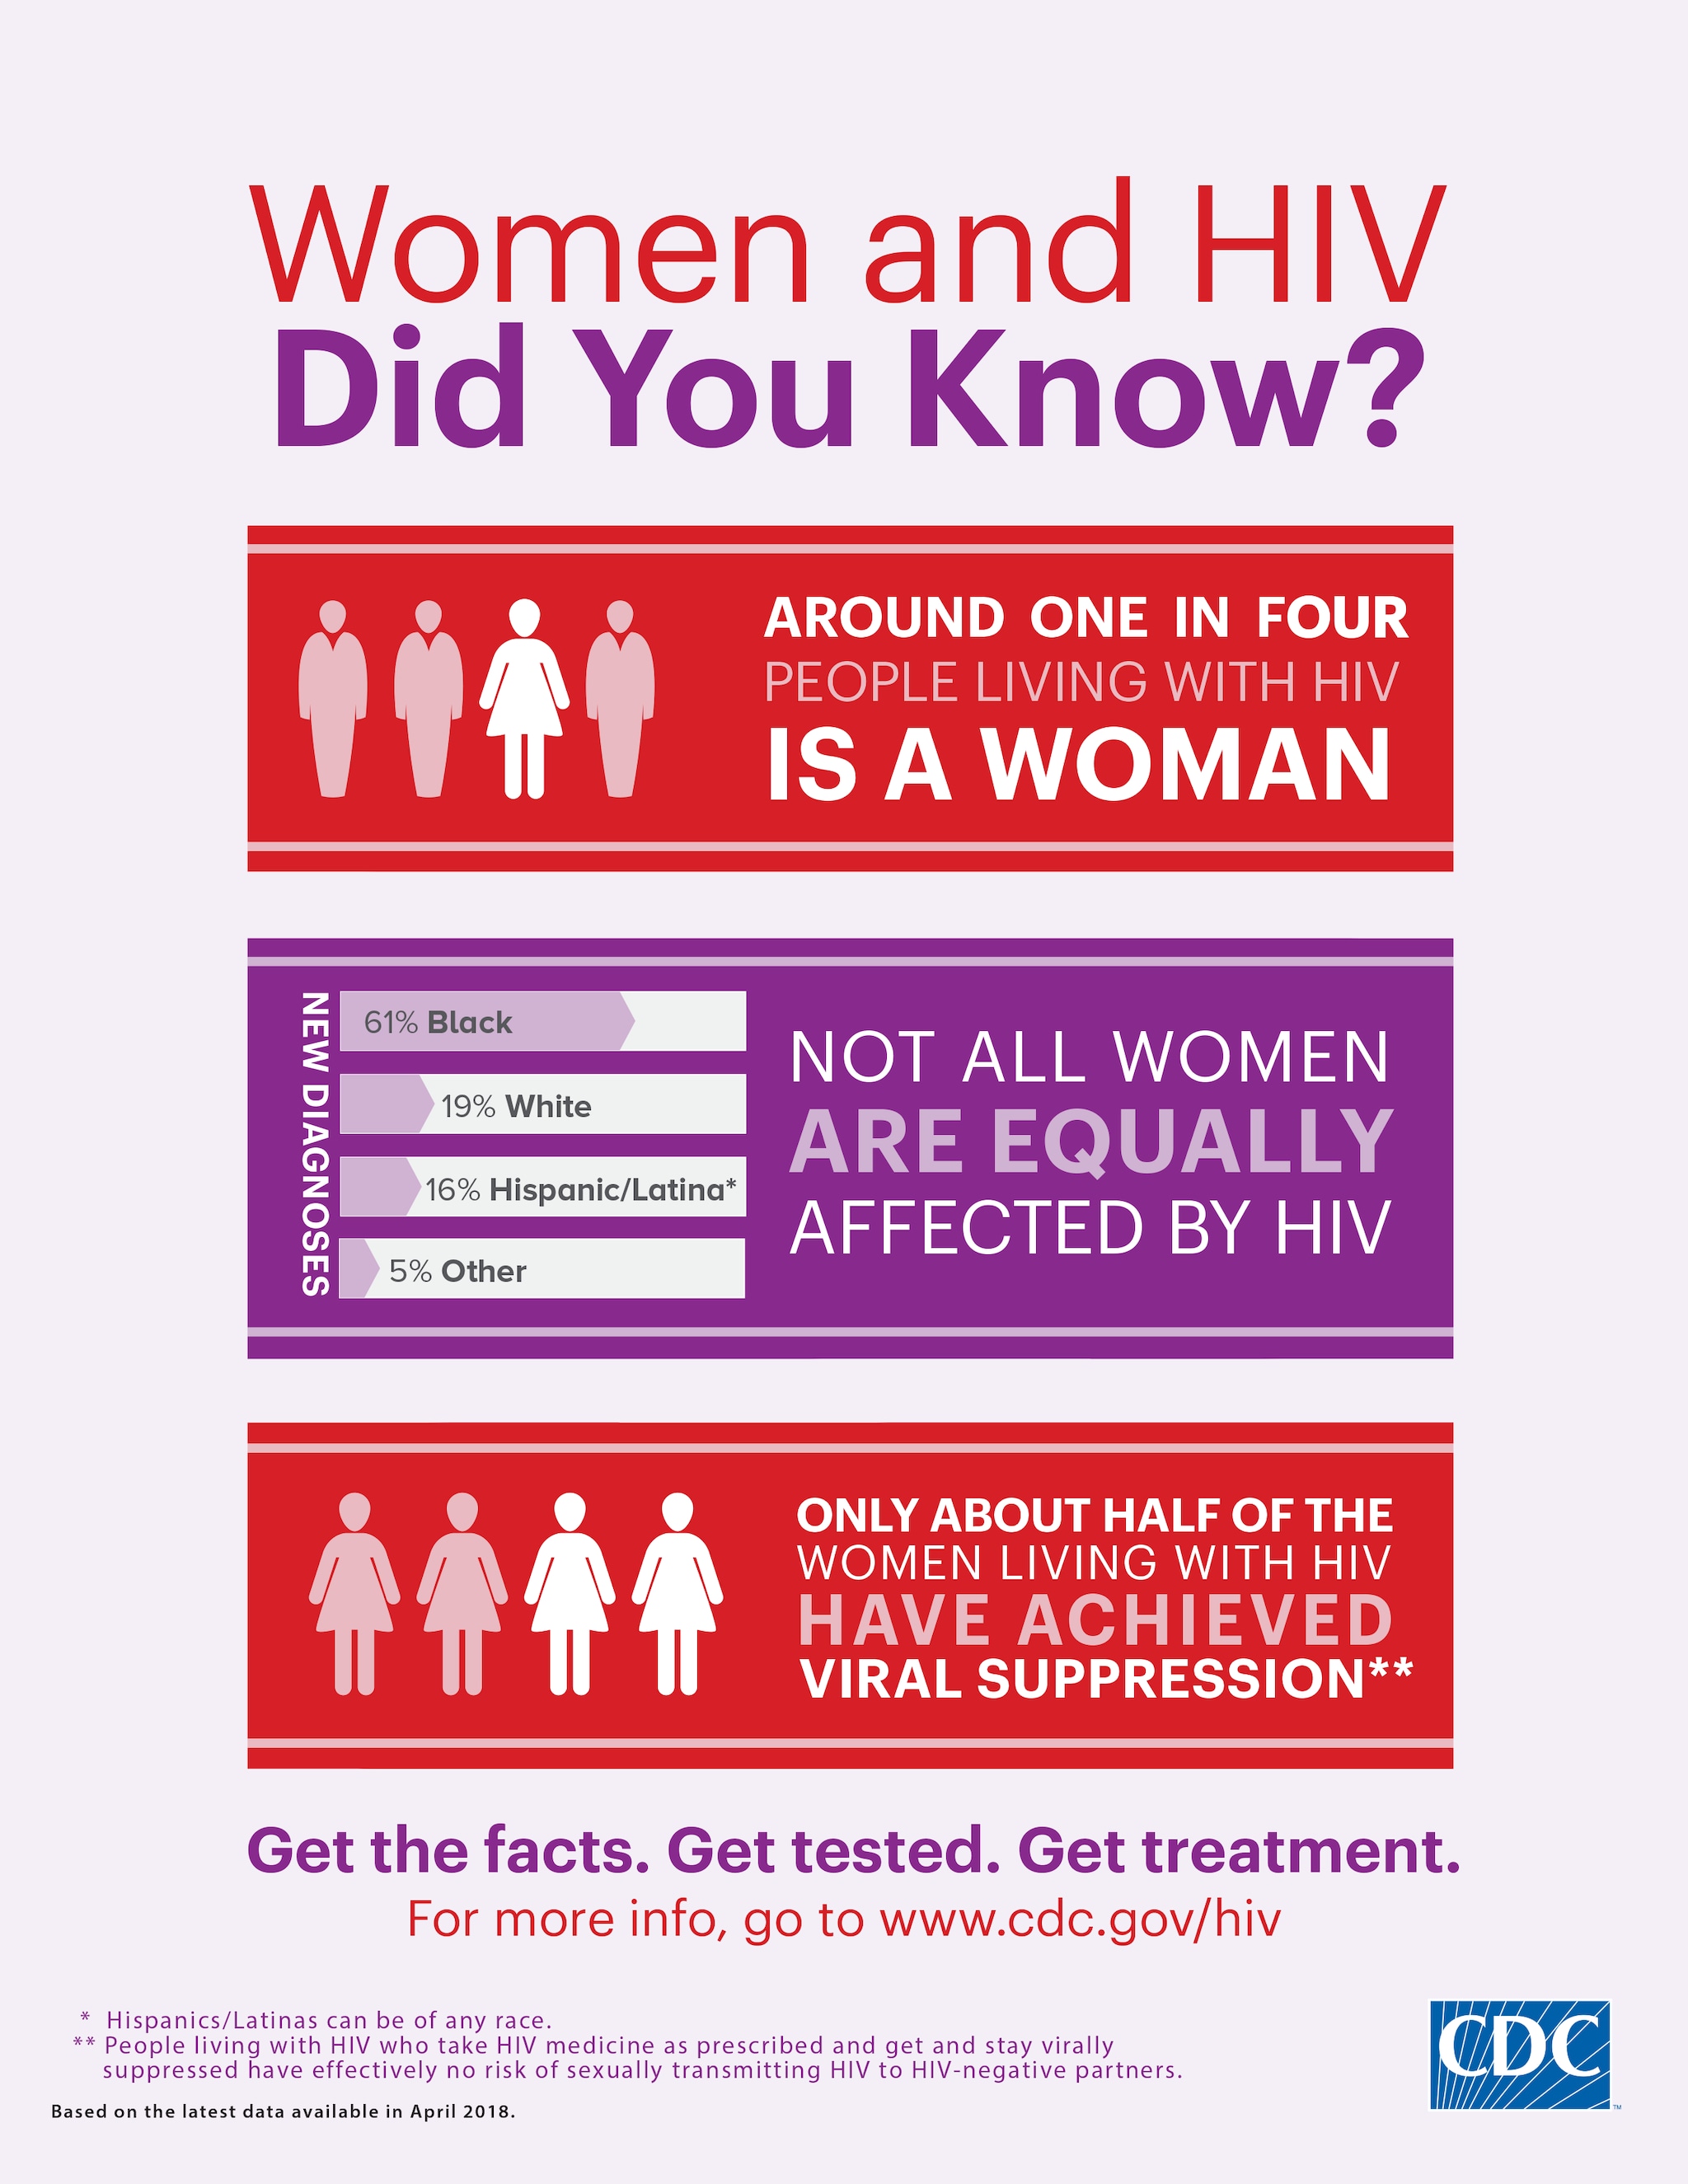 Herenciageneticayenfermedad Infographics And Posters Resource Library Hiv Aids Cdc